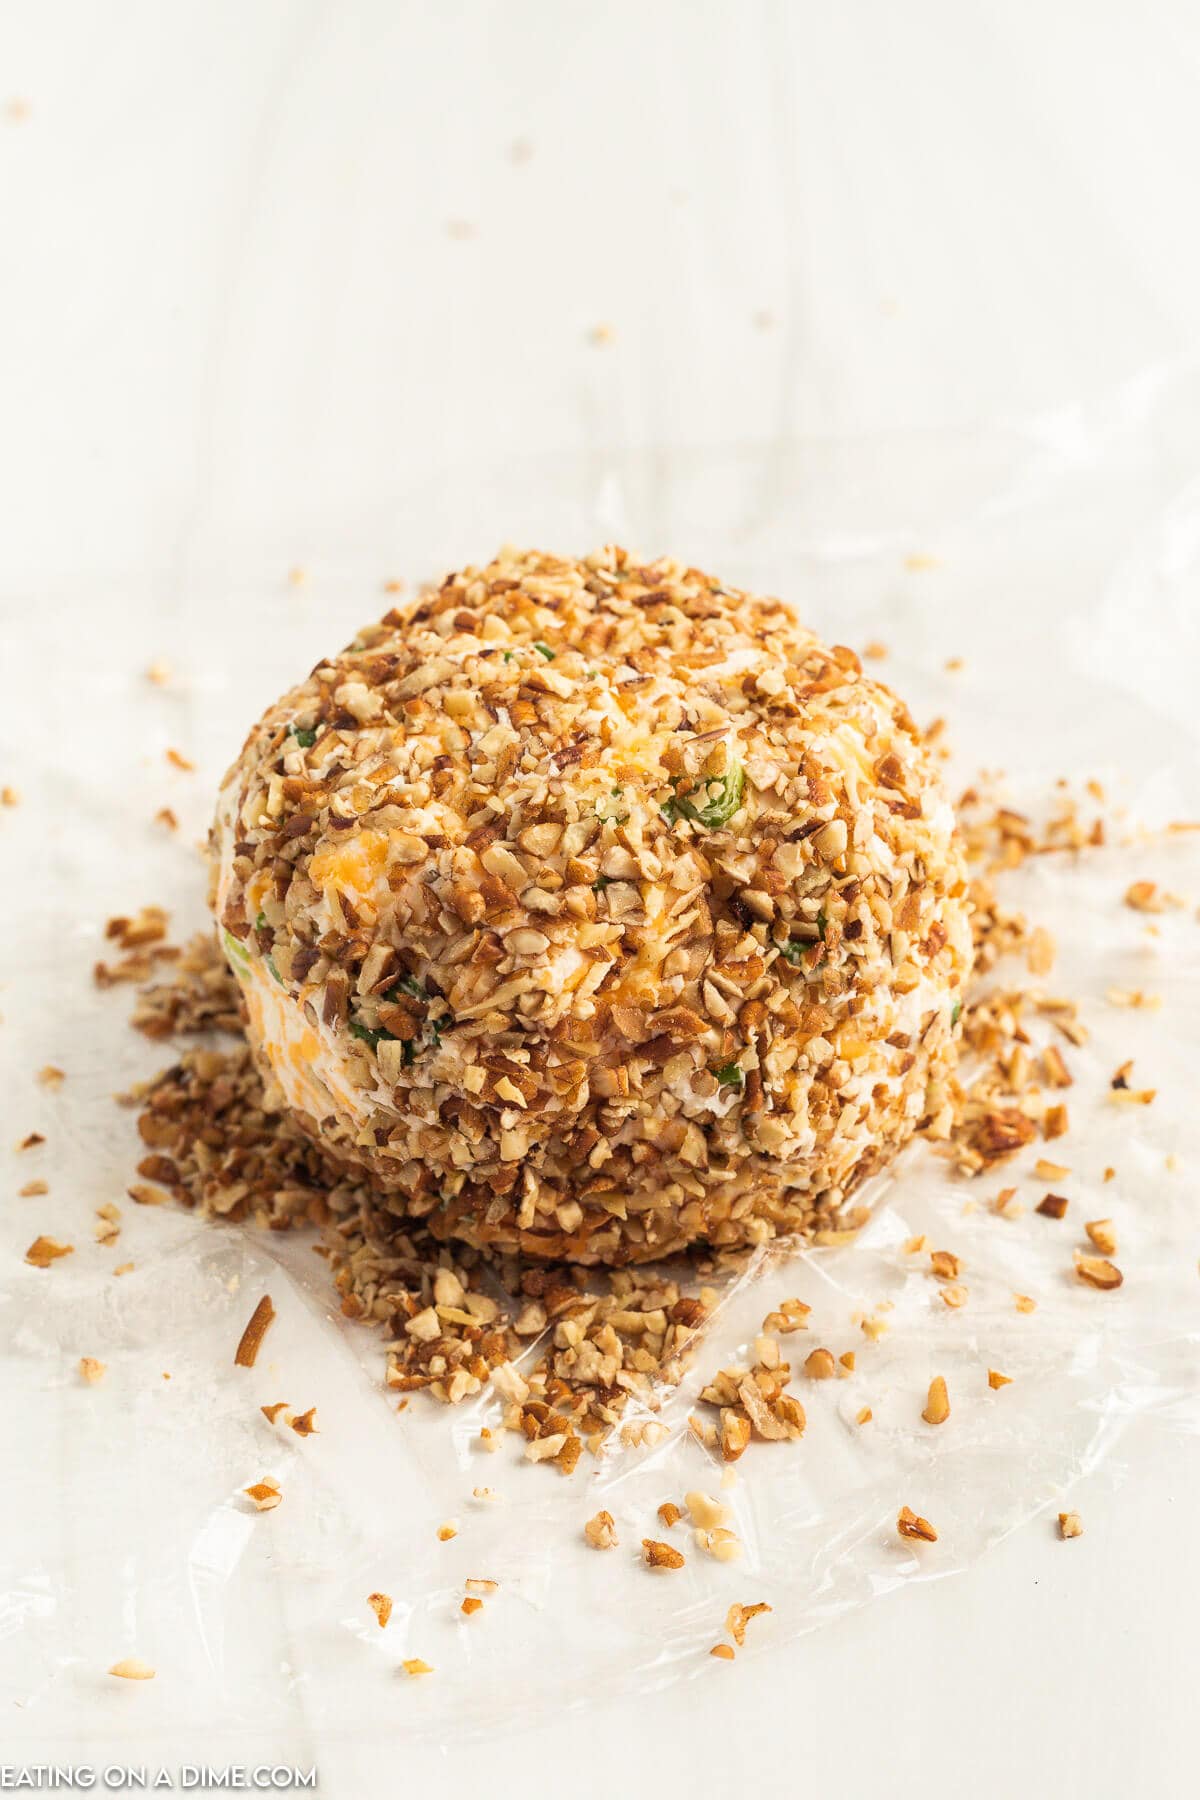 Roll the cheese ball mixture into chopped pecans